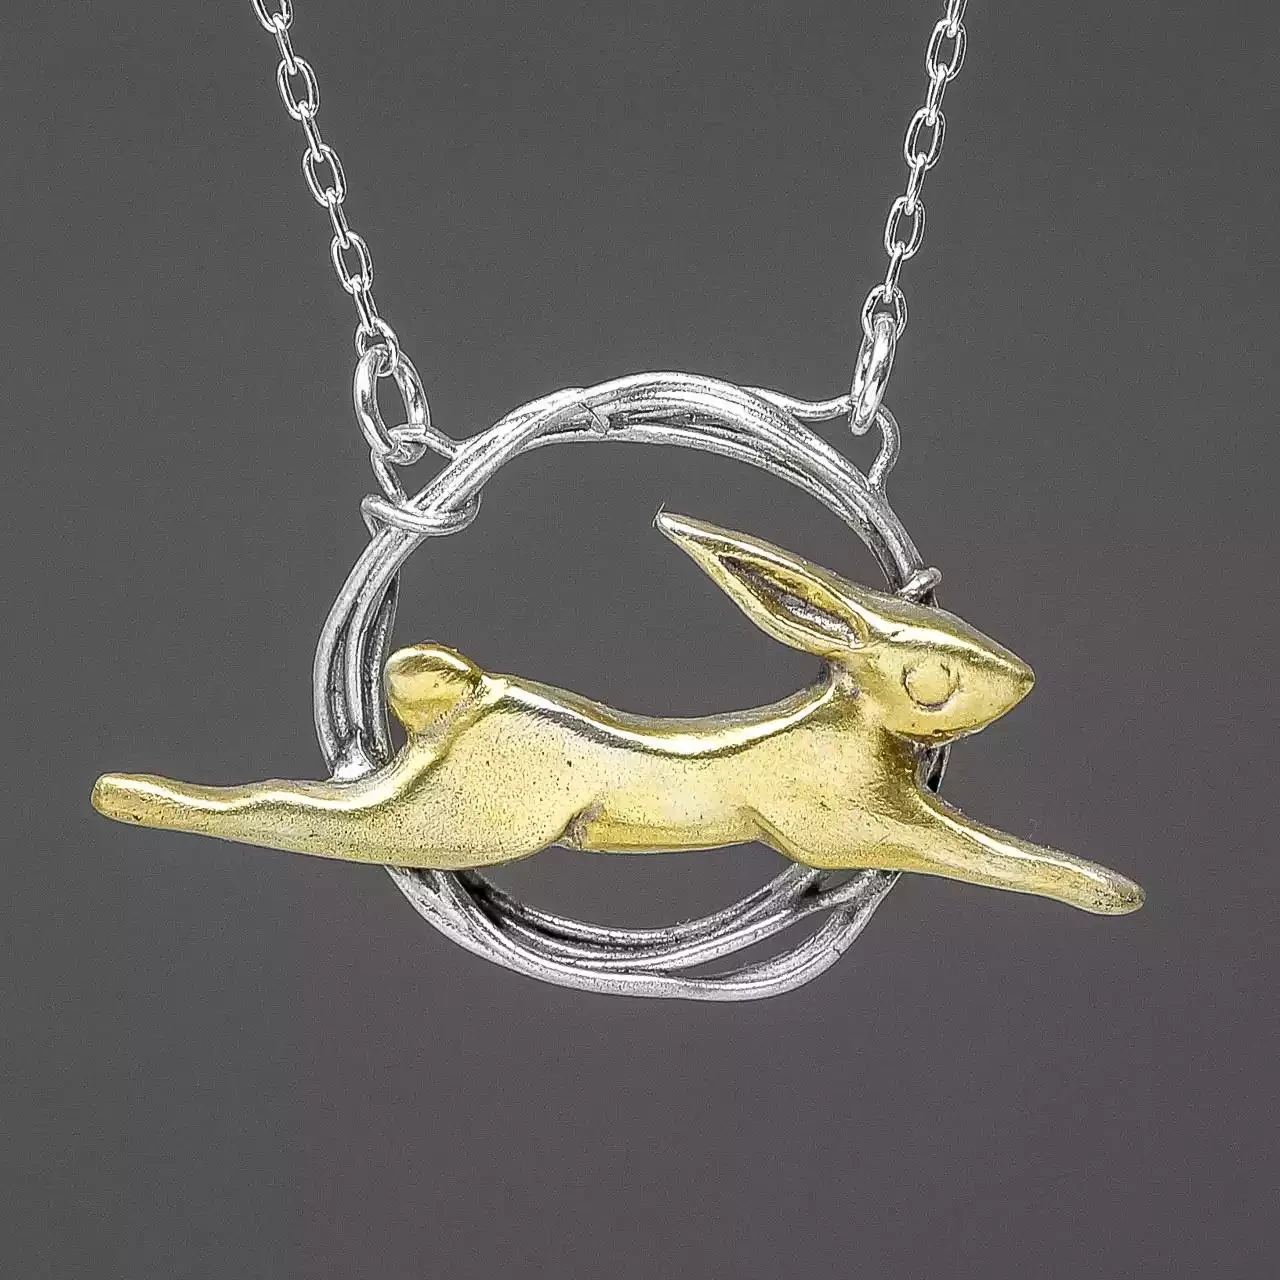 Jumping Hare Silver and Gold Plated Necklace by Xuella Arnold